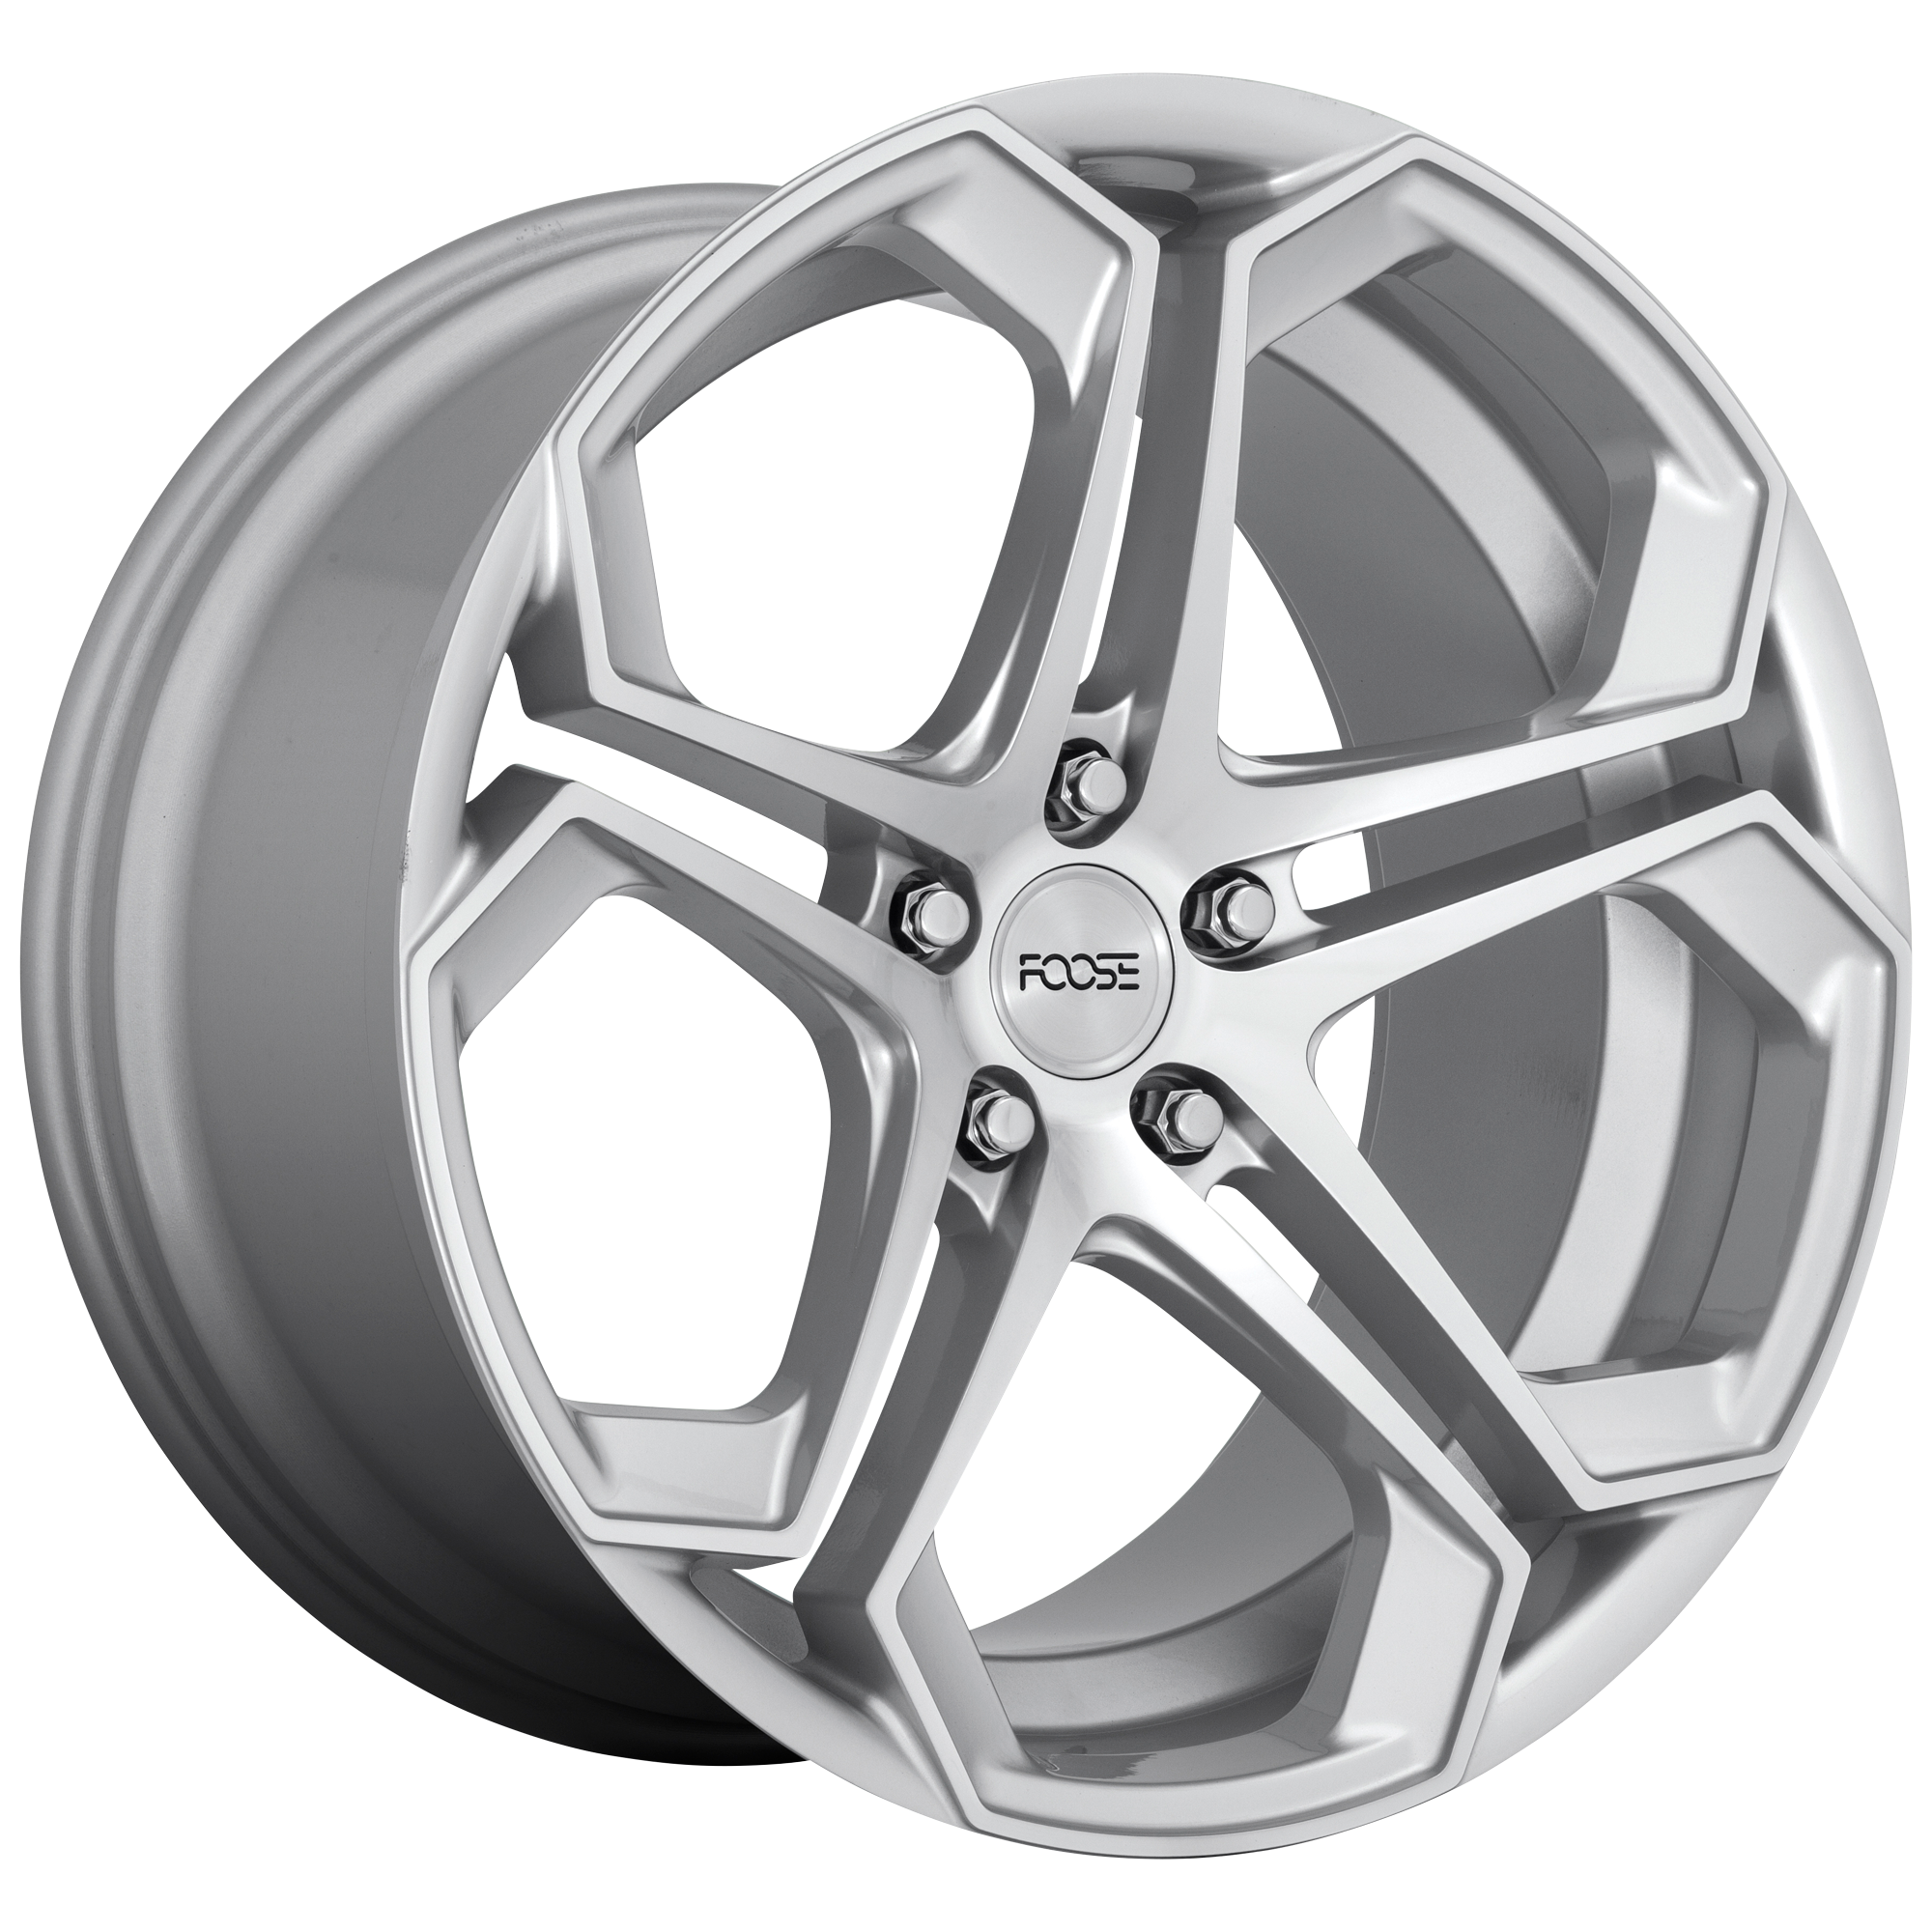 IMPALA 20x9 5x114.30 GLOSS SILVER MACHINED (35 mm) - Tires and Engine Performance